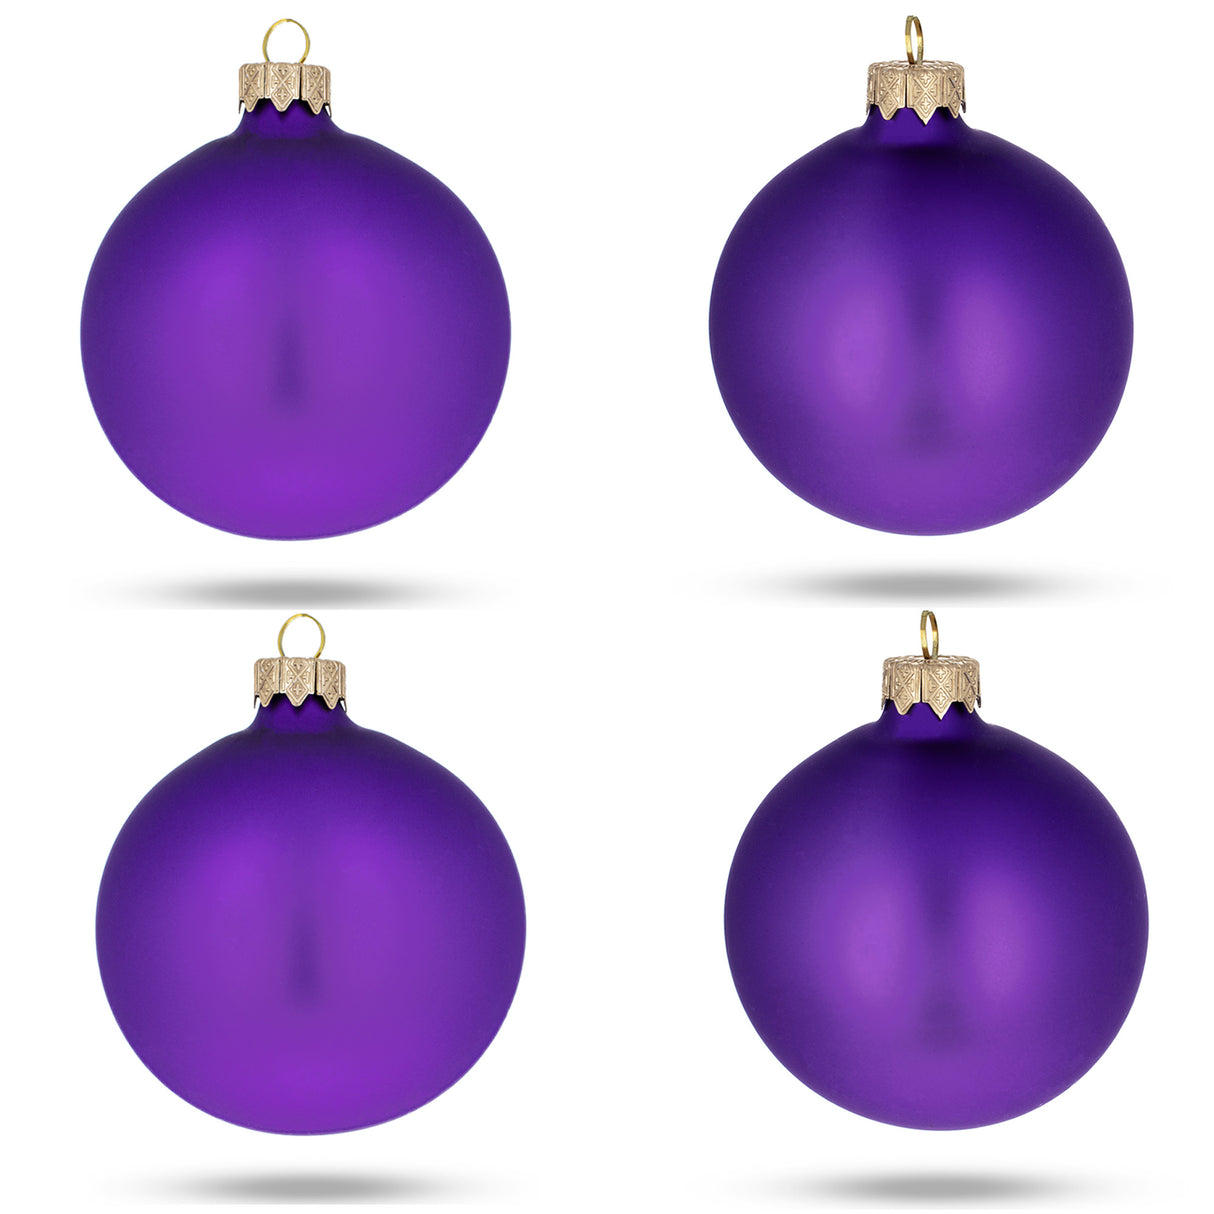 Glass Set of 4 Purple Matte Glass Ball Christmas Ornaments 4 Inches in Purple color Round